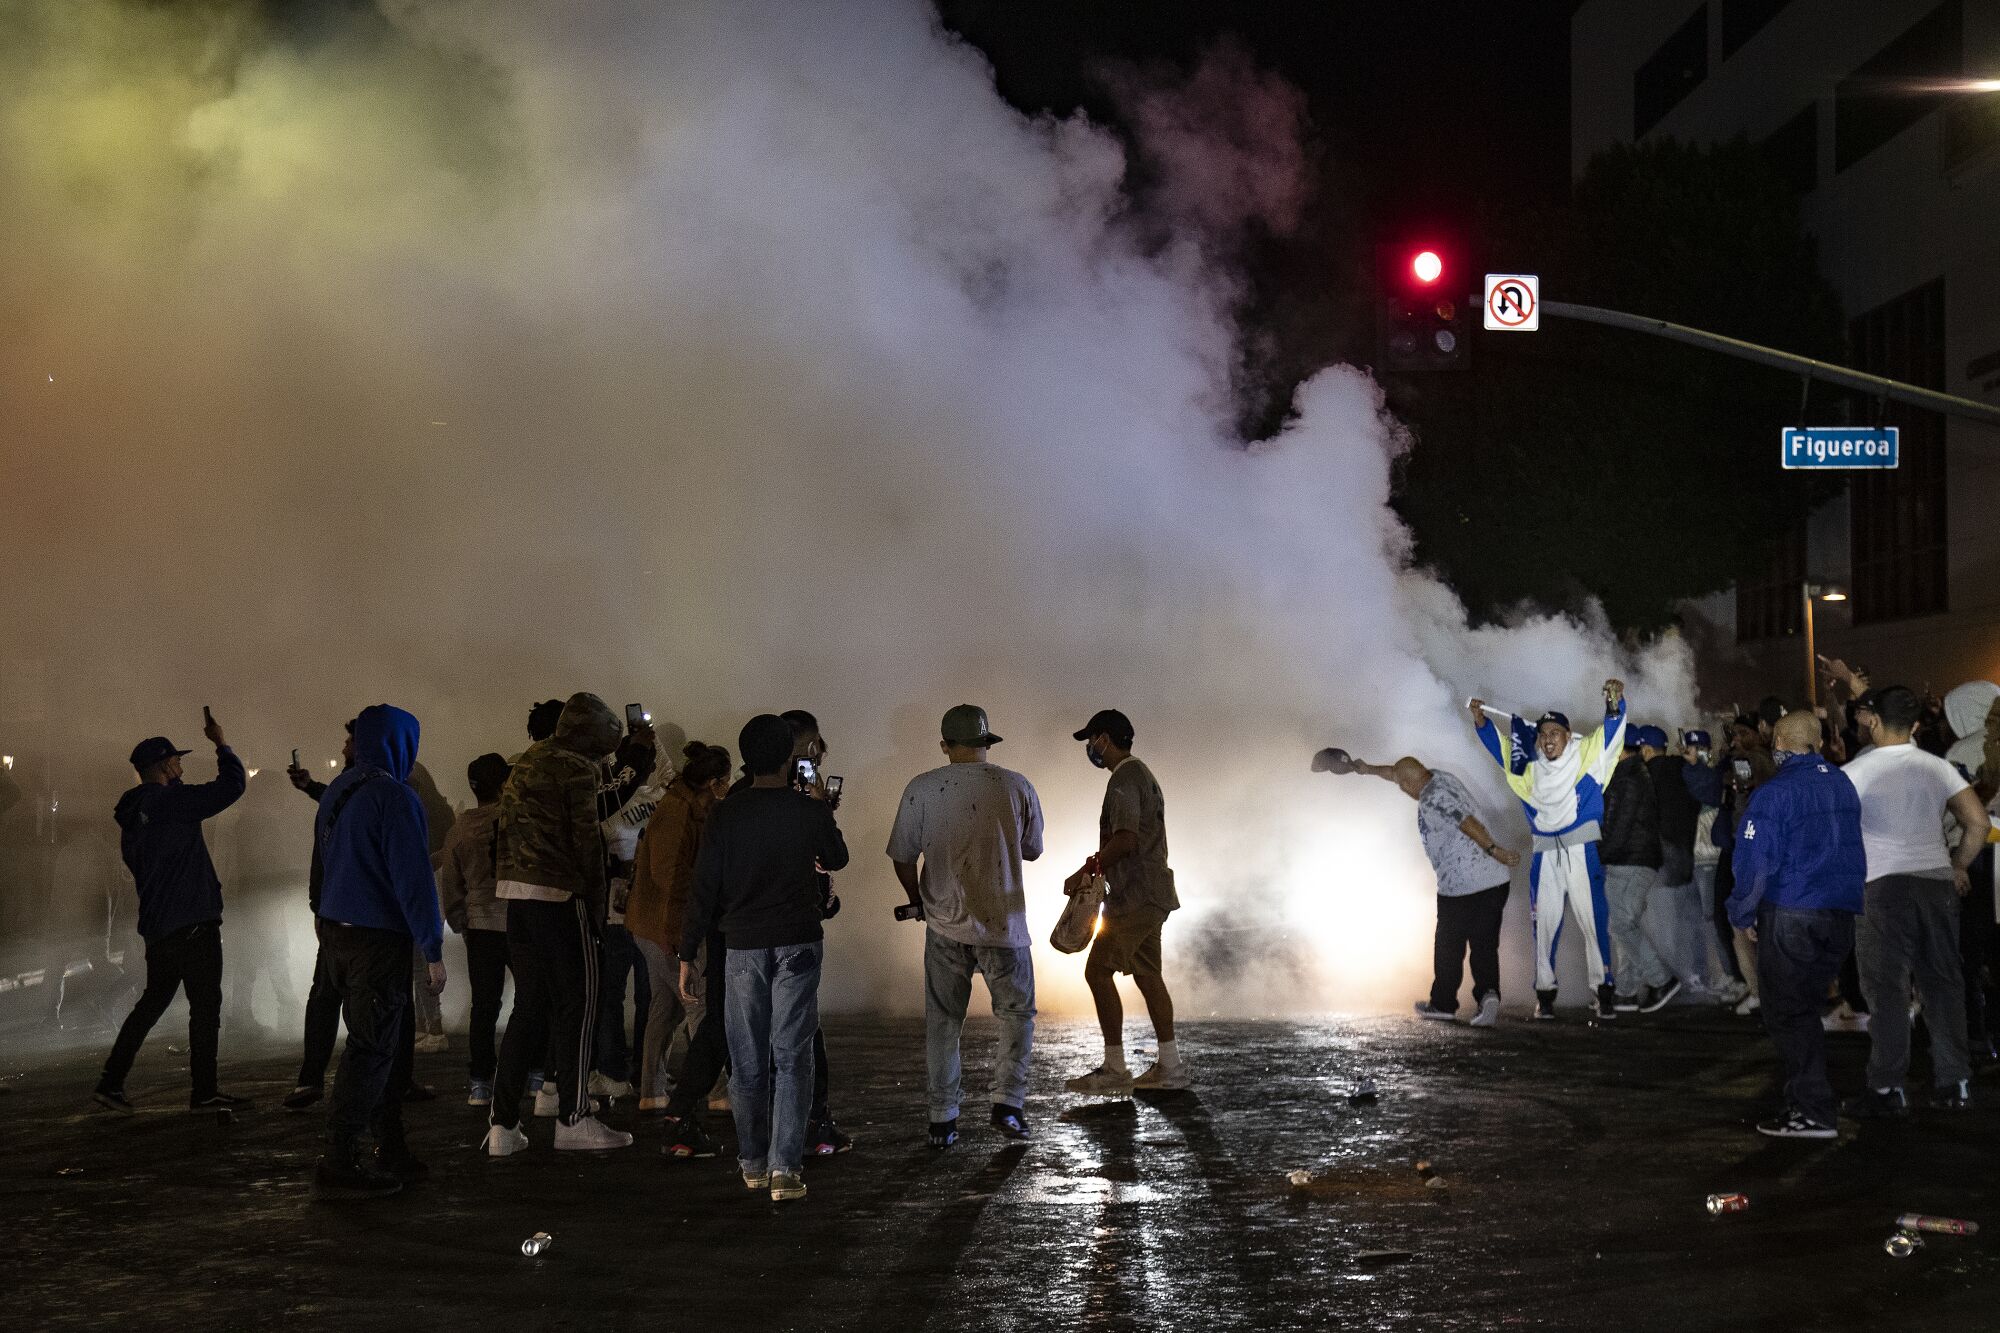 People block an intersection as a car spinning its tires creates a wall of smoke.